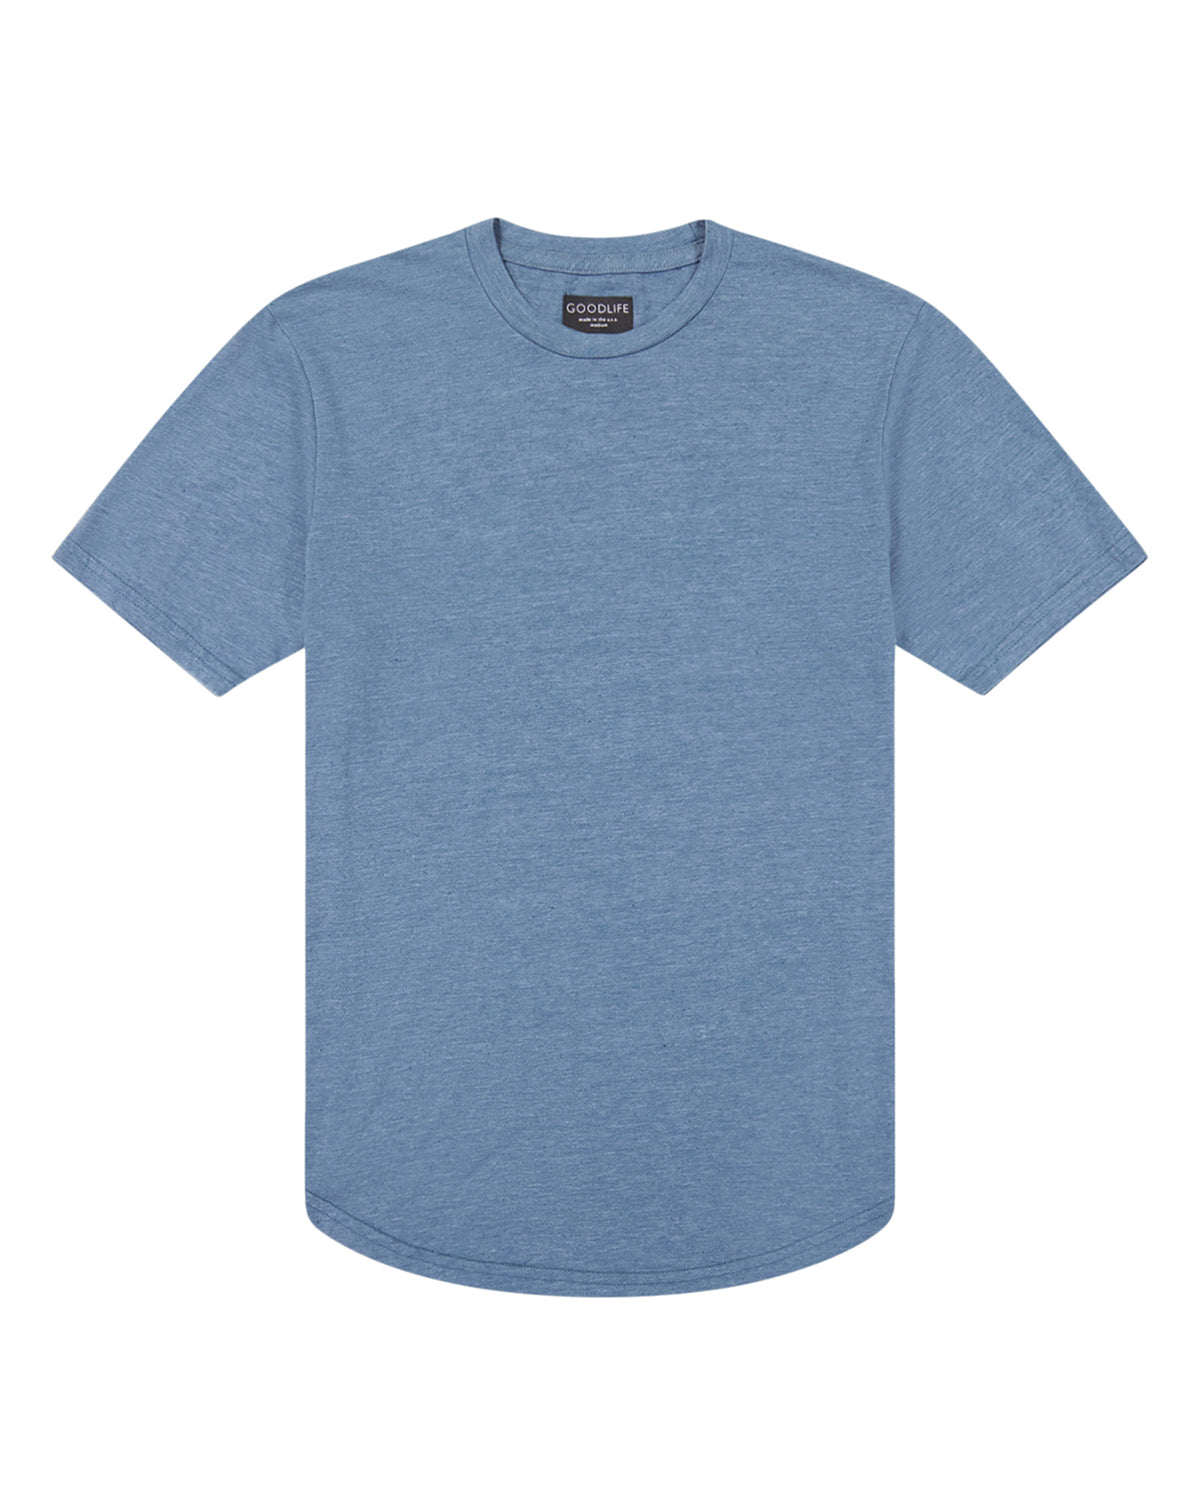 Short Sleeve Triblend Scallop Crew - Indian Teal